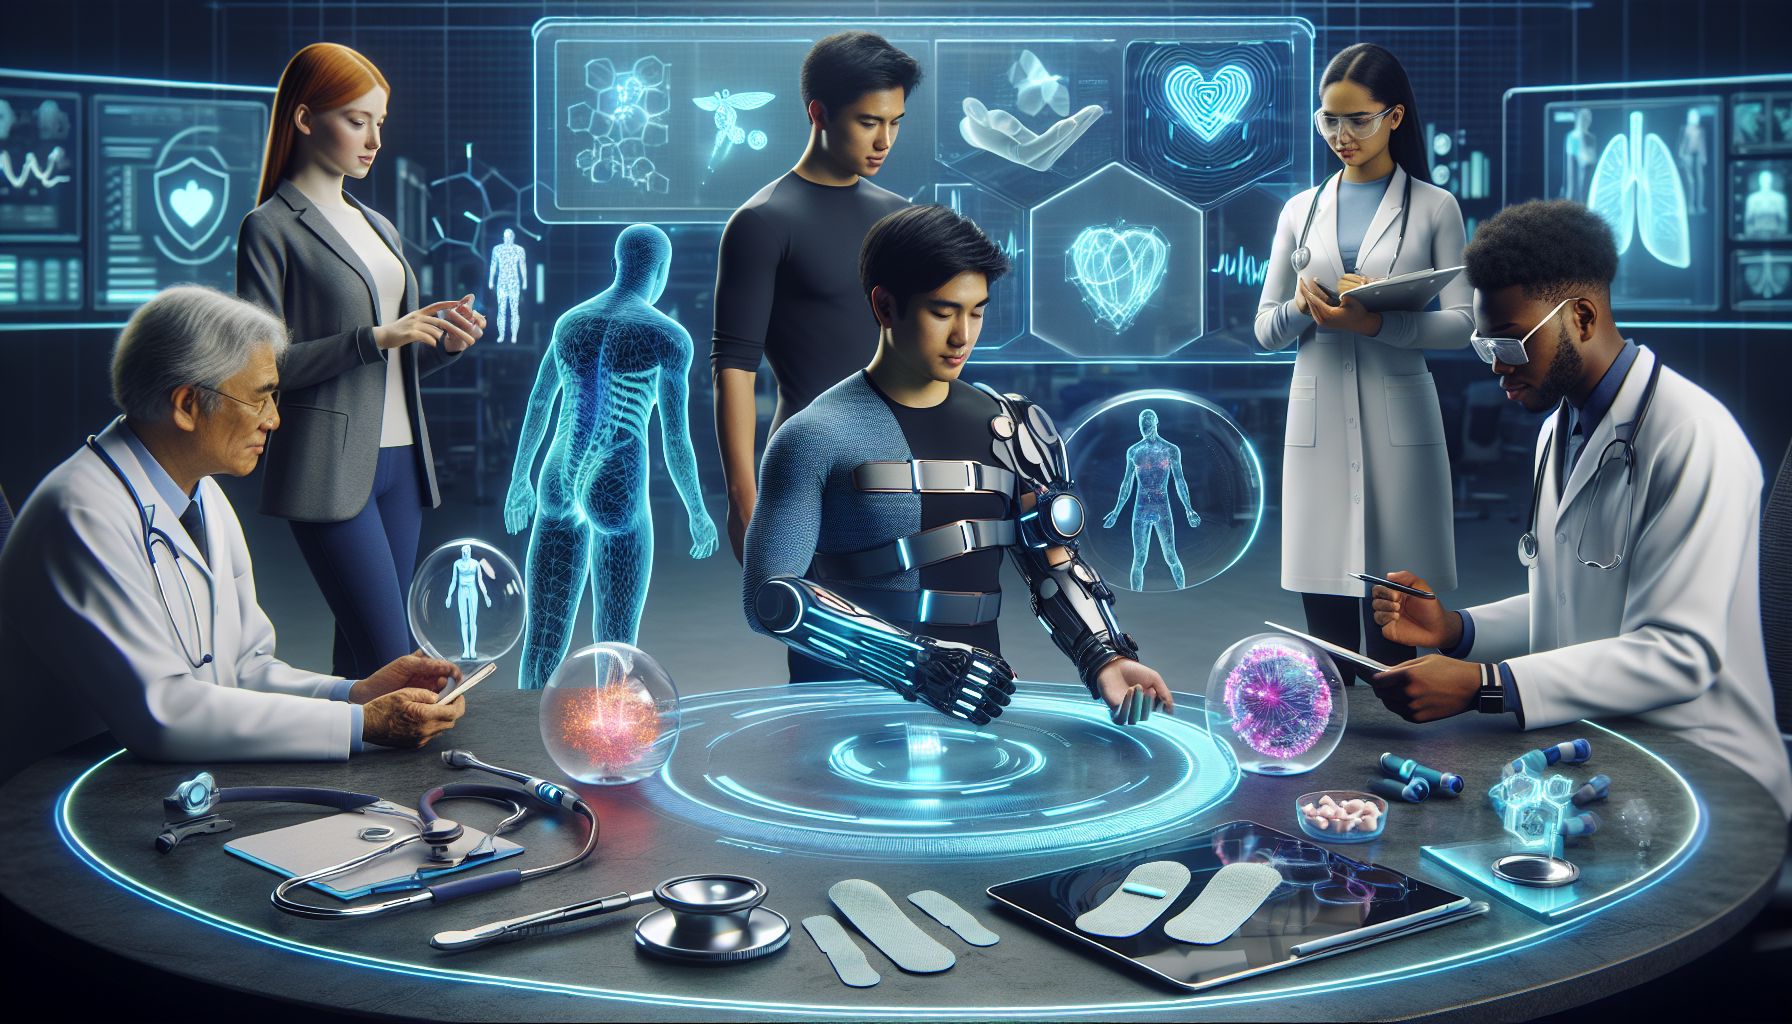 The Future of Healthcare: Medical Products for the Younger Generation